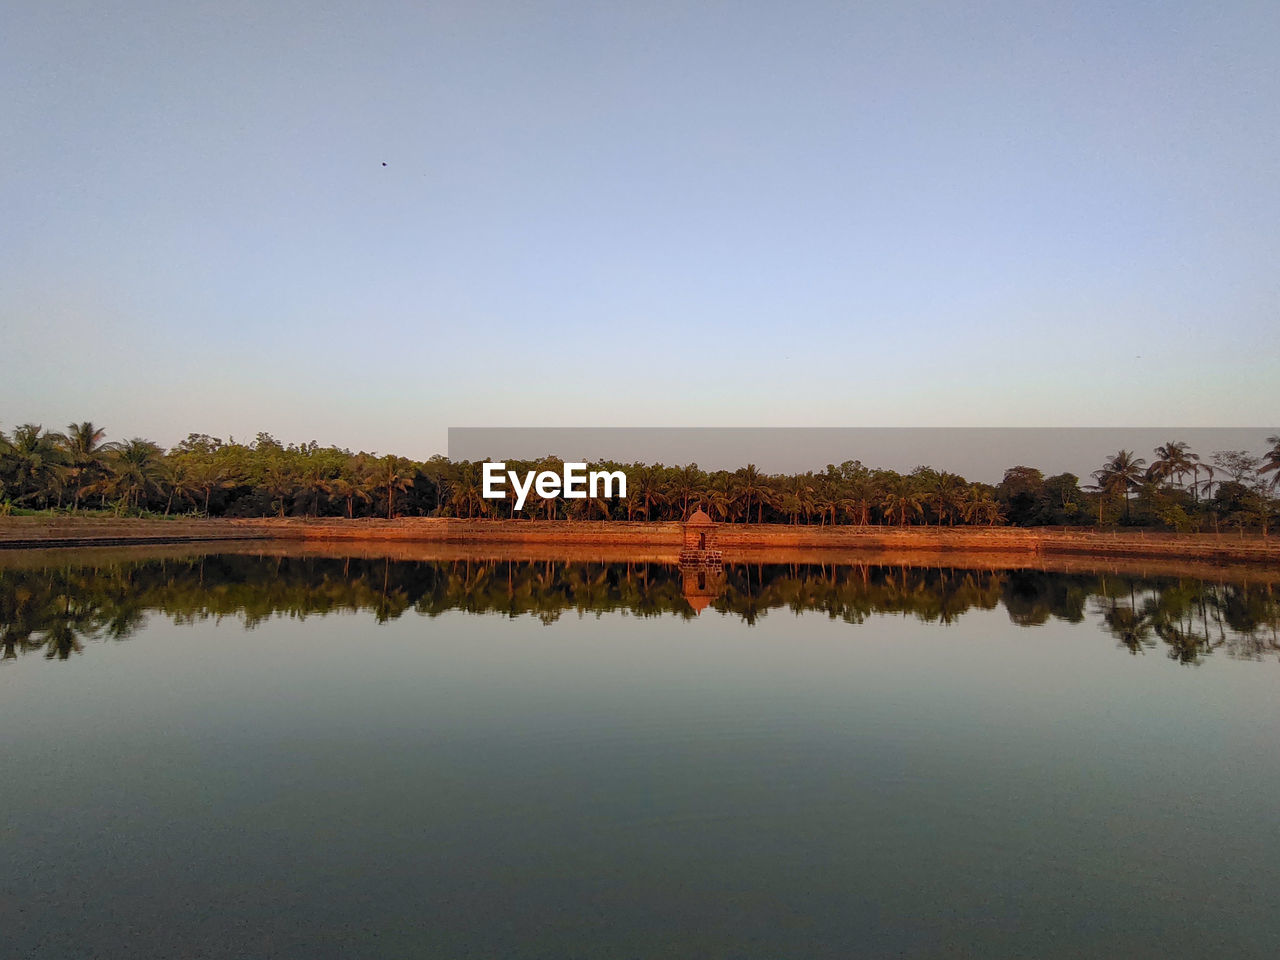 SCENIC VIEW OF LAKE AGAINST CLEAR SKY DURING SUNSET